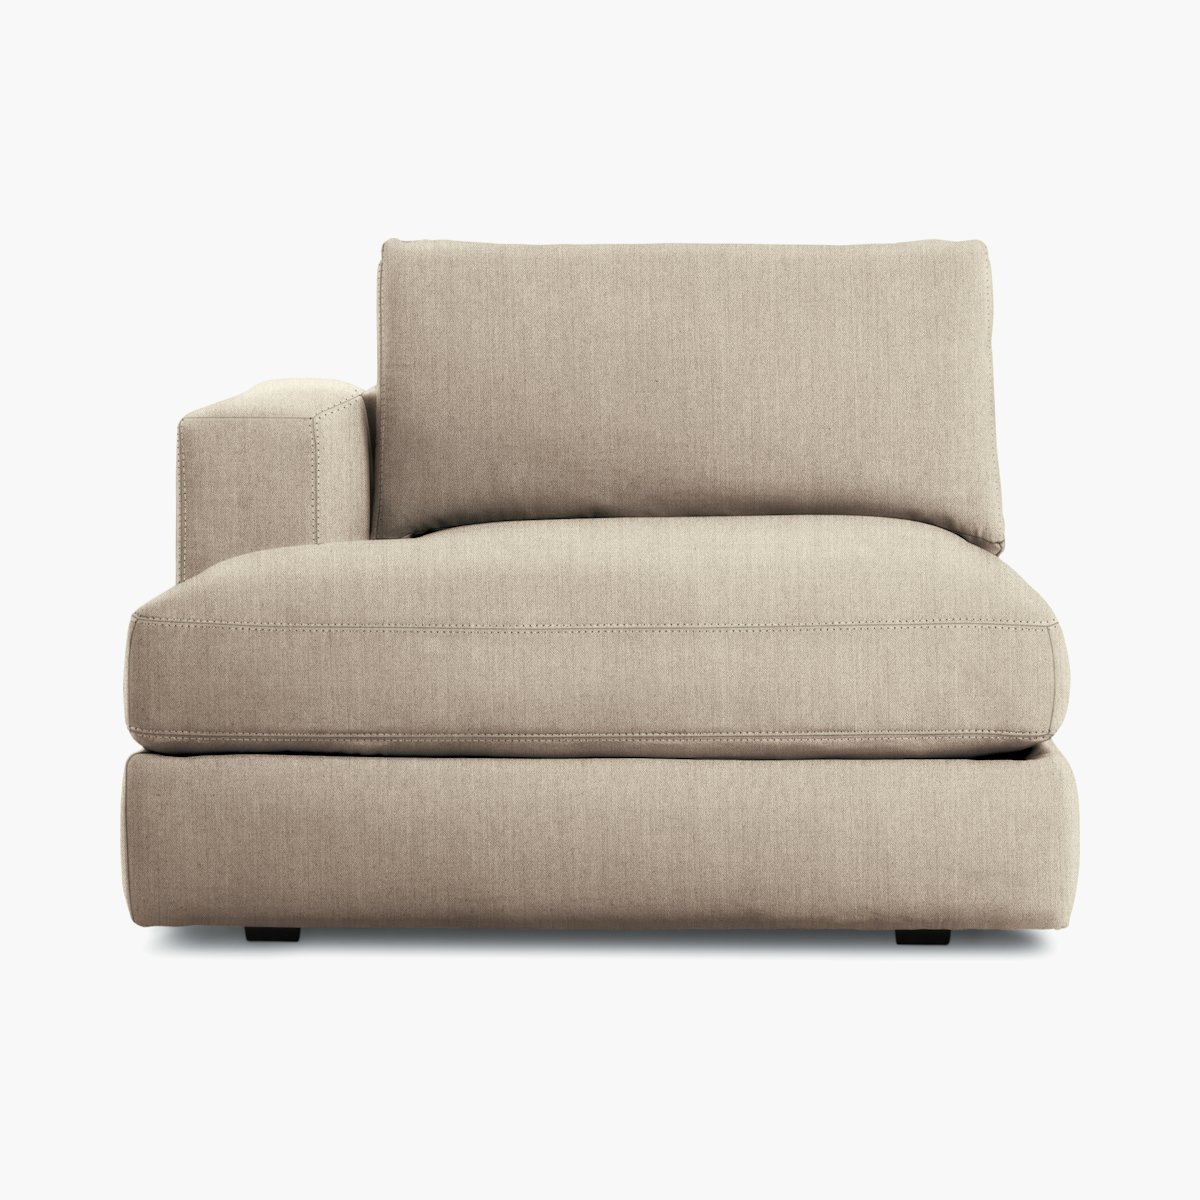 Reid Chaise Outlet